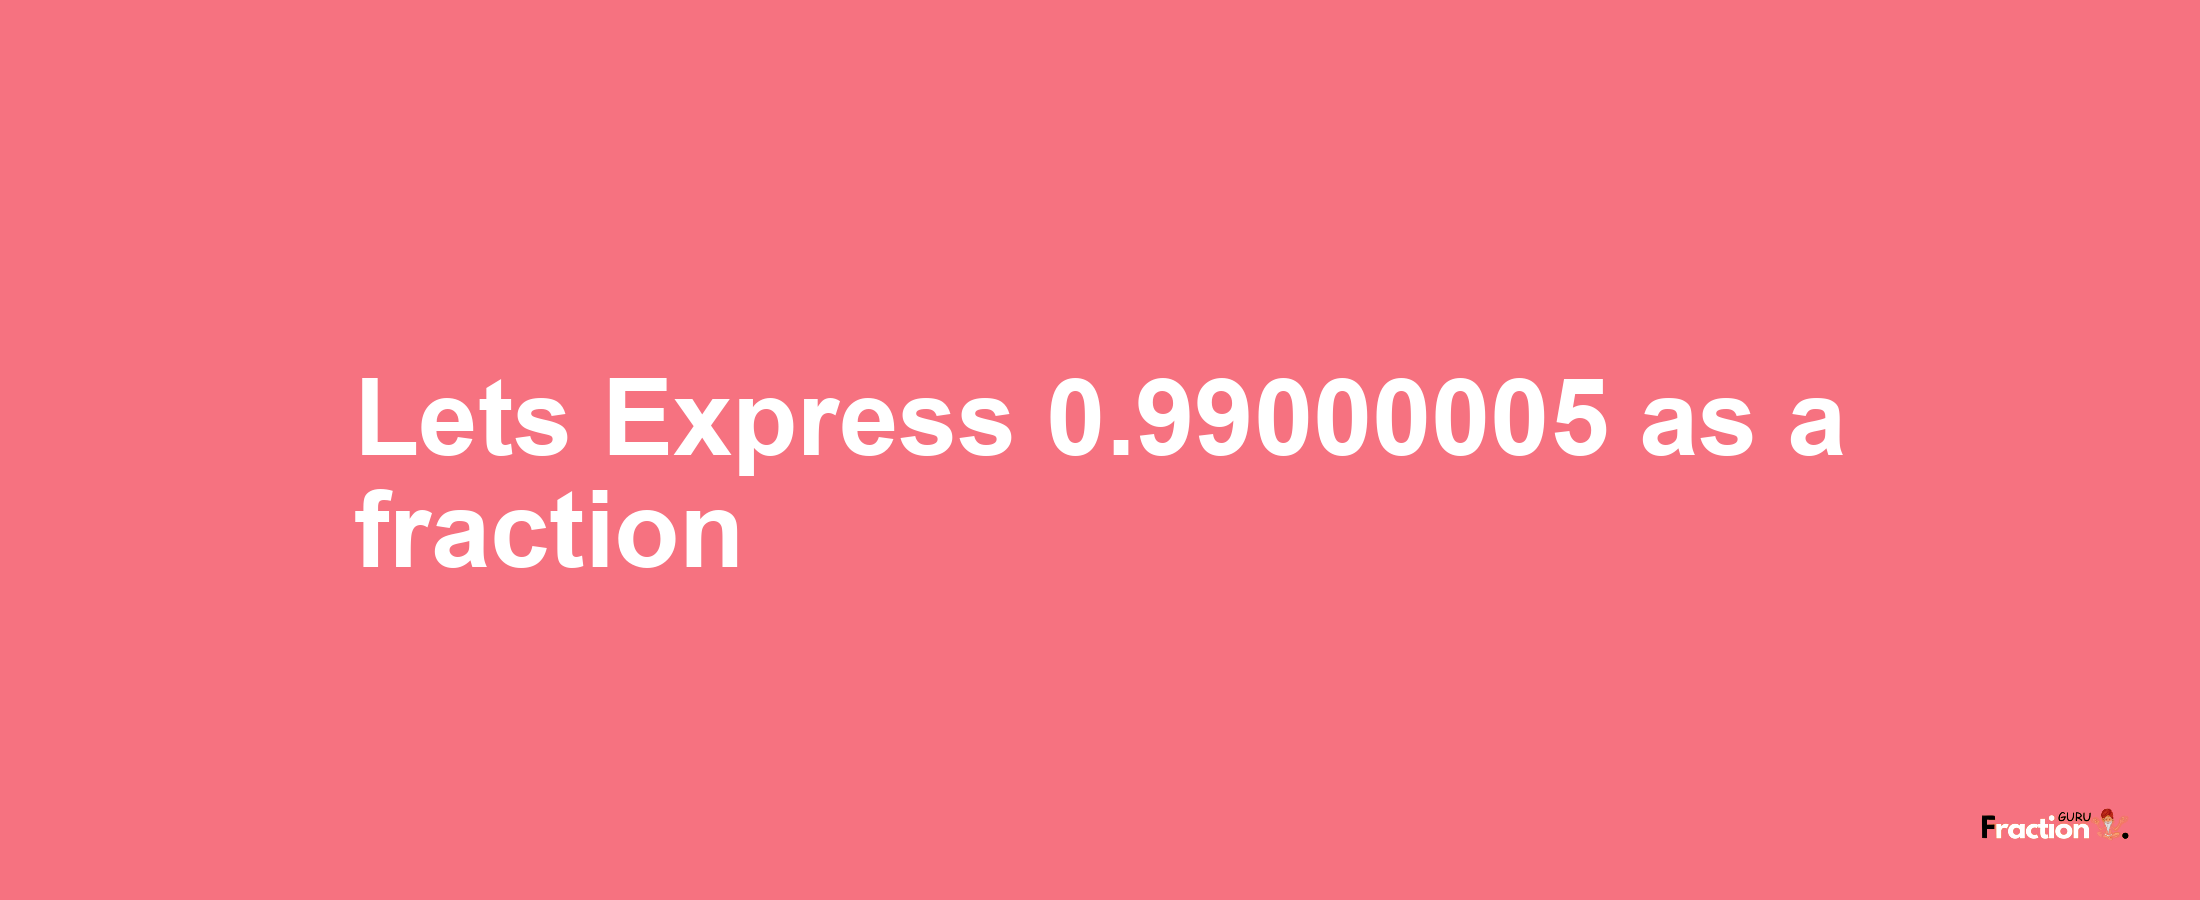 Lets Express 0.99000005 as afraction